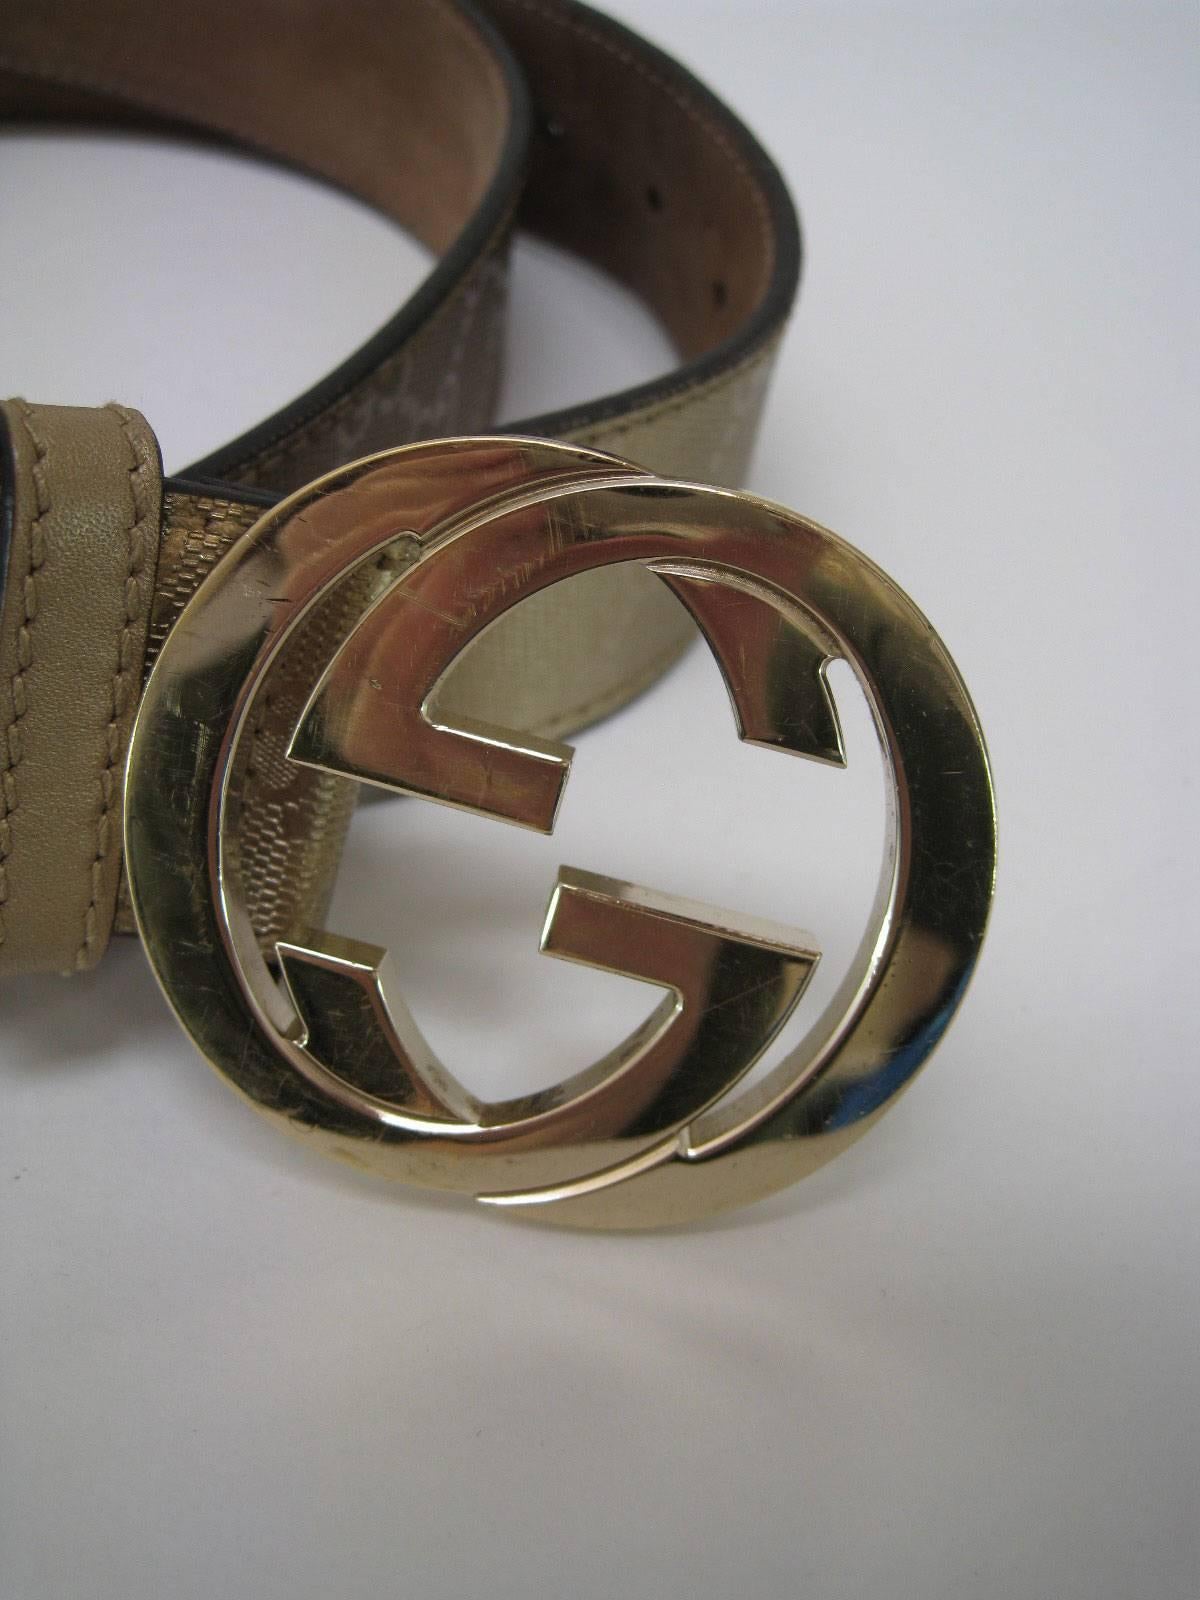 Gucci Guccissima gold metallic leather belt with G buckle.

Interlocking G buckle.

Textured all over with Gucci logo imprint.

Gucci stamp and number inside.

Labeled size 40.

Made in Italy.

This item is in good pre-owned condition with some wear